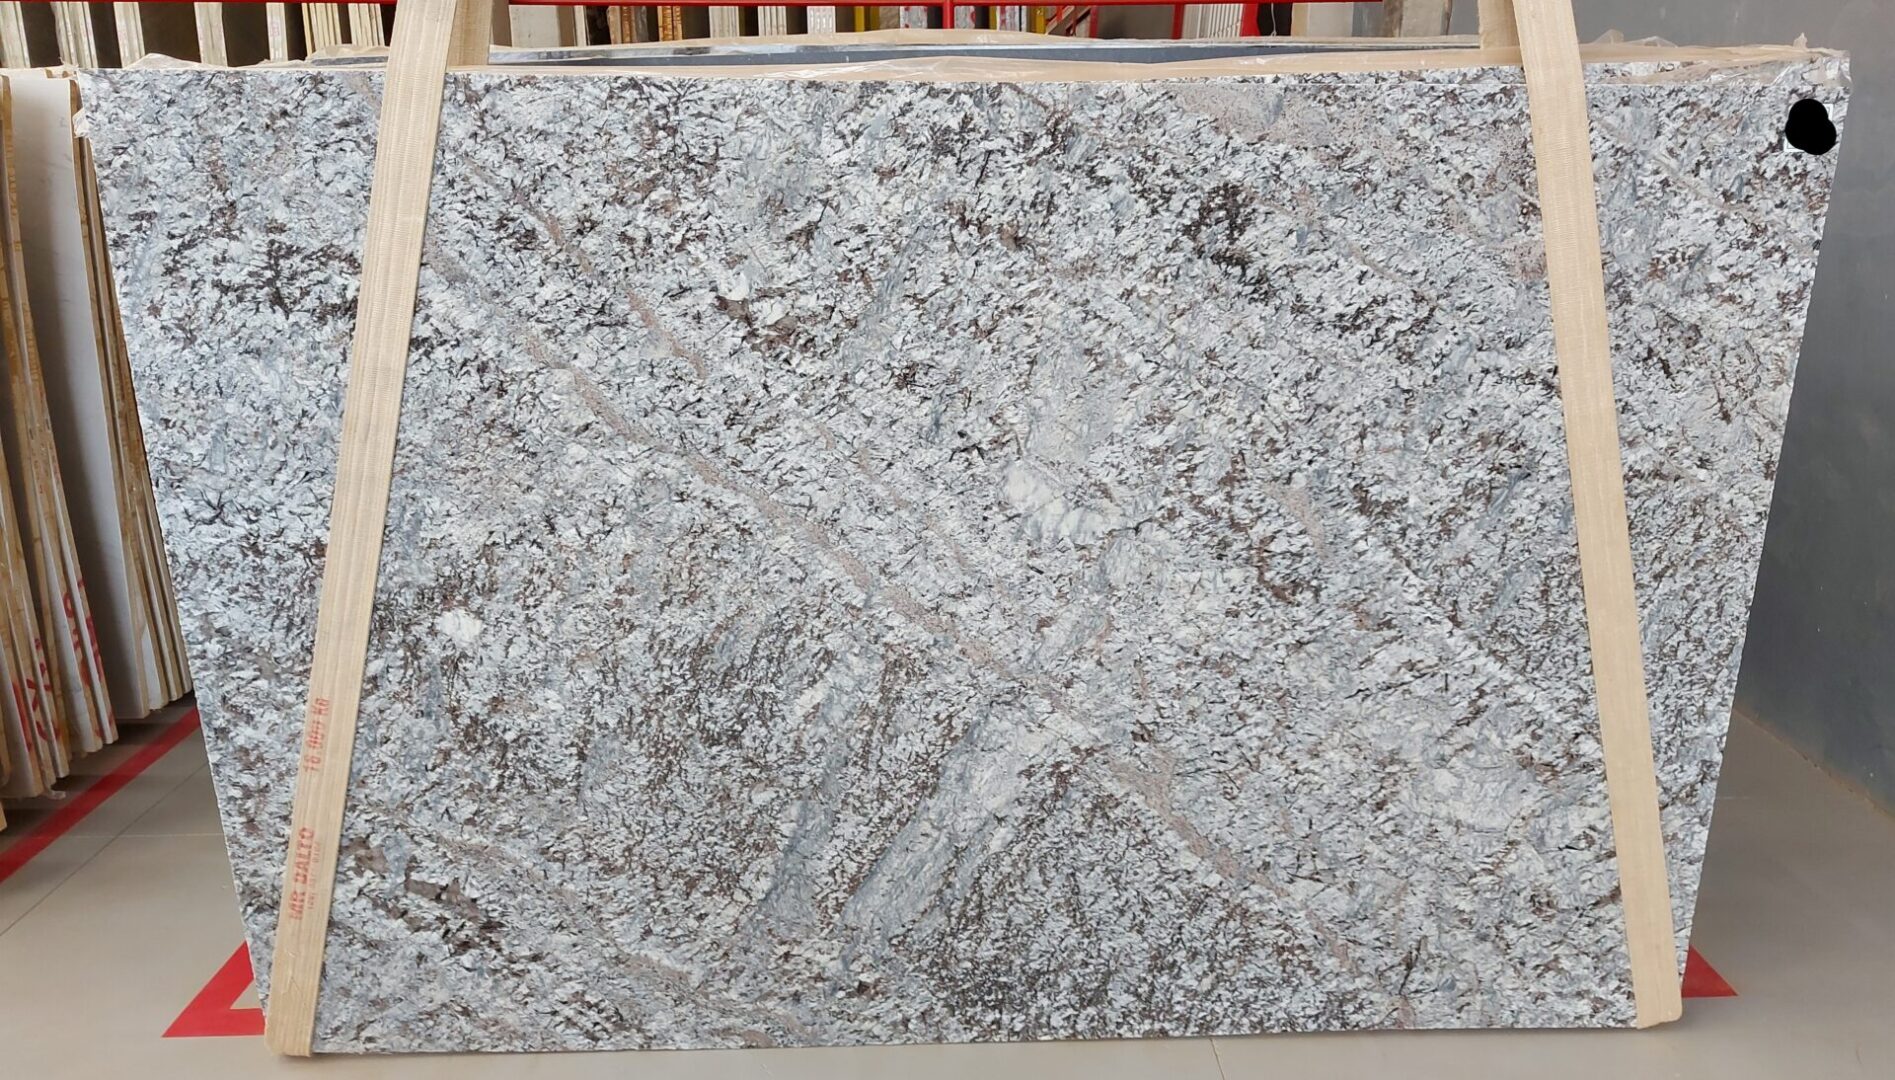 A view of a granite slab